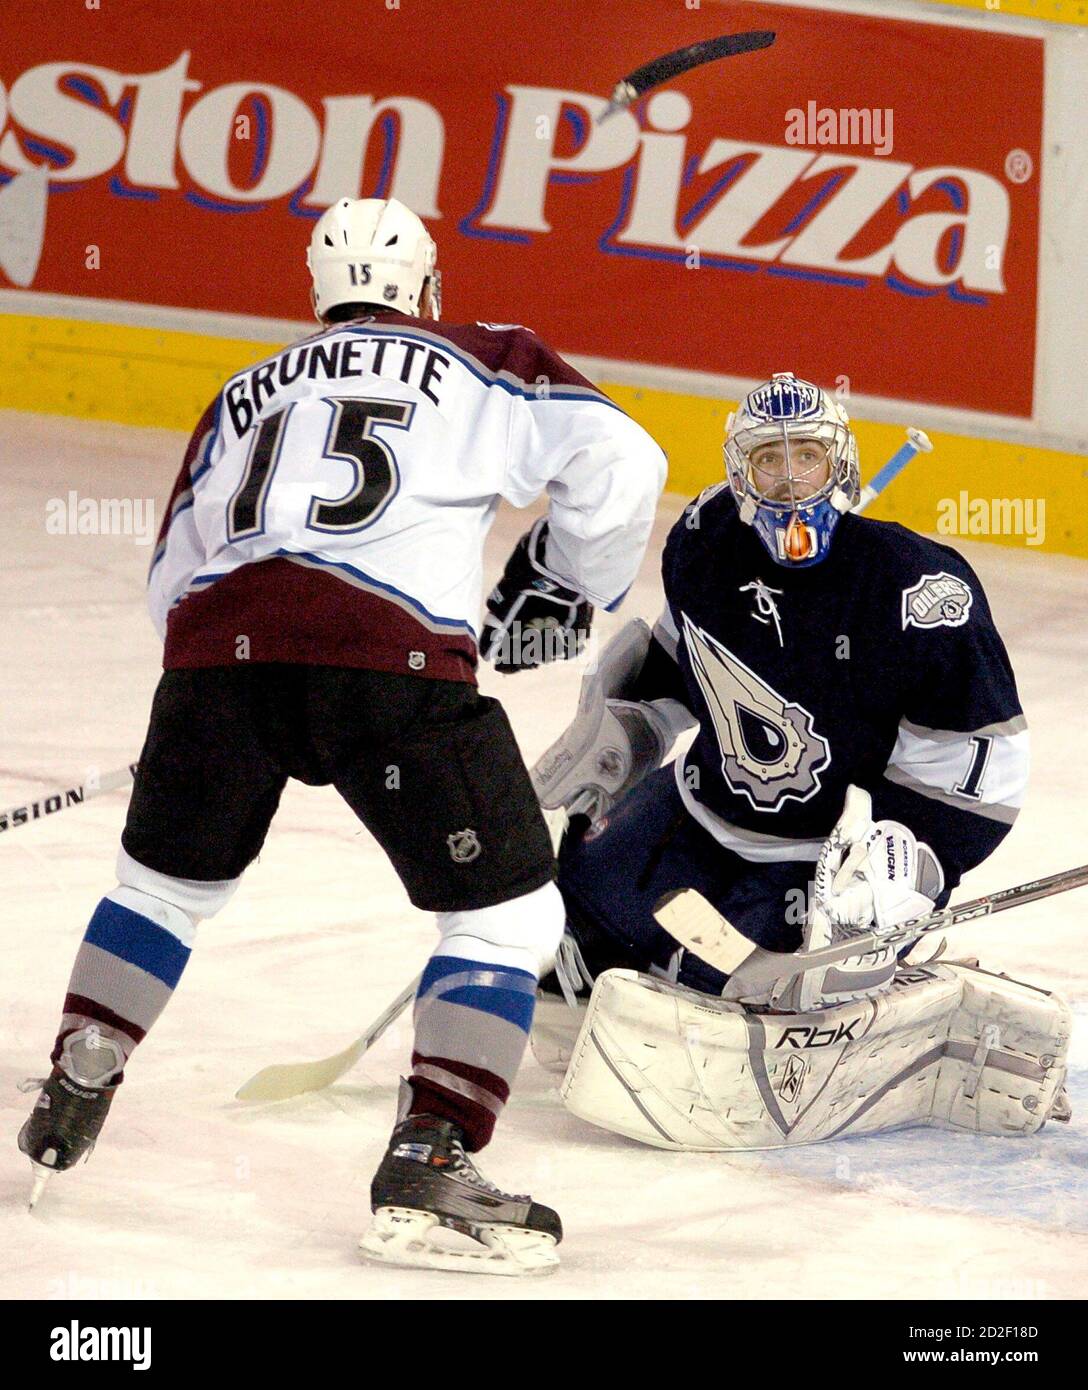 Colorado Avalanche forward Andrew Brunette (15) and Edmonton Oilers goaltender Mike Morrison (R) watch Brunette's broken stick blade fly over their heads during first period NHL action in Edmonton November 29, 2005. The blade broke off the shaft when the puck hit the stick. REUTERS/Dan Riedlhuber Stock Photo